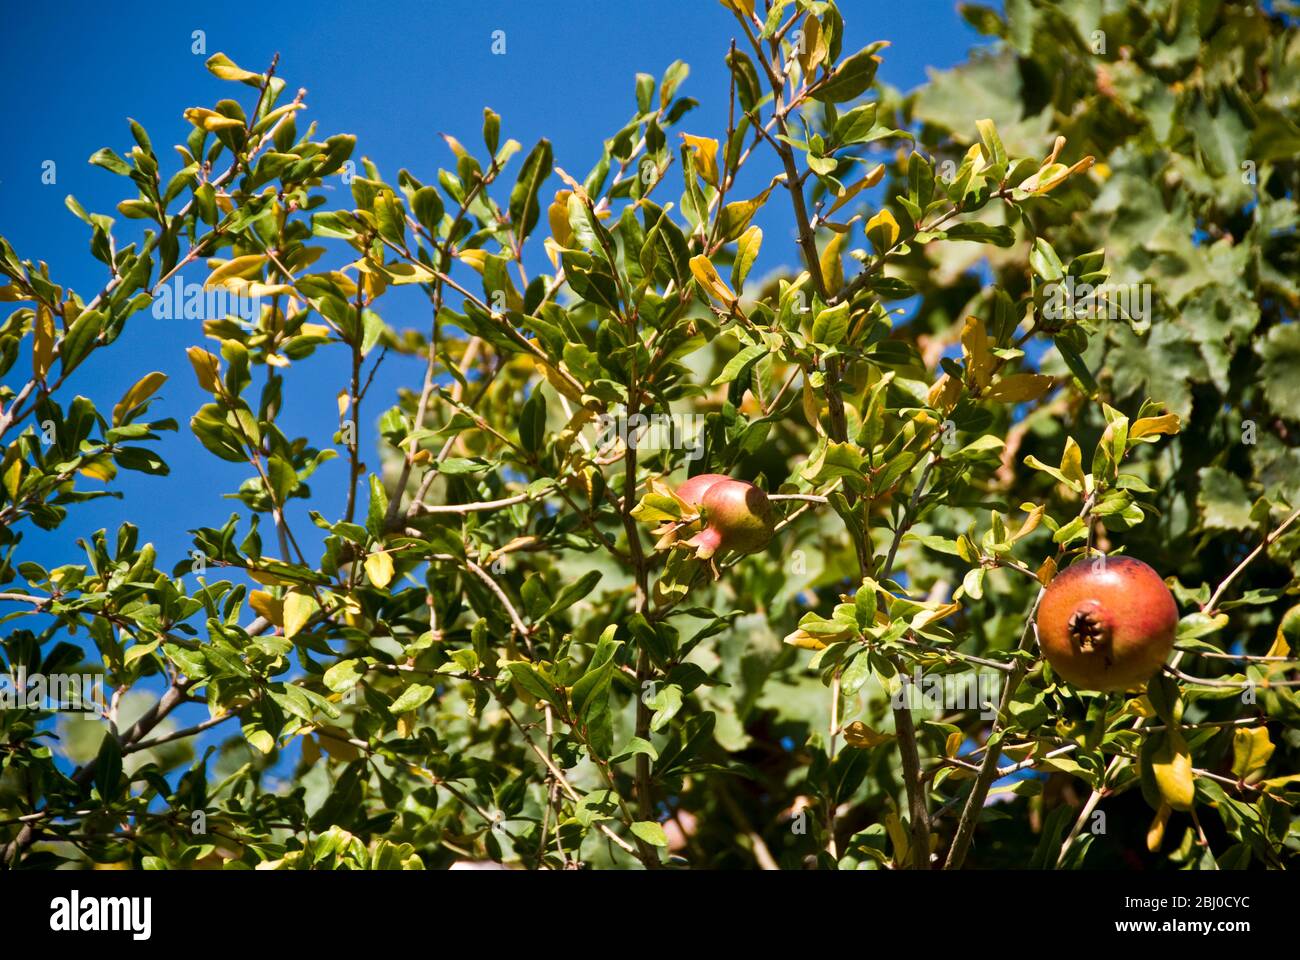 Pomegranates growing in trees in southern Cyprus, against bright blue sky - Stock Photo